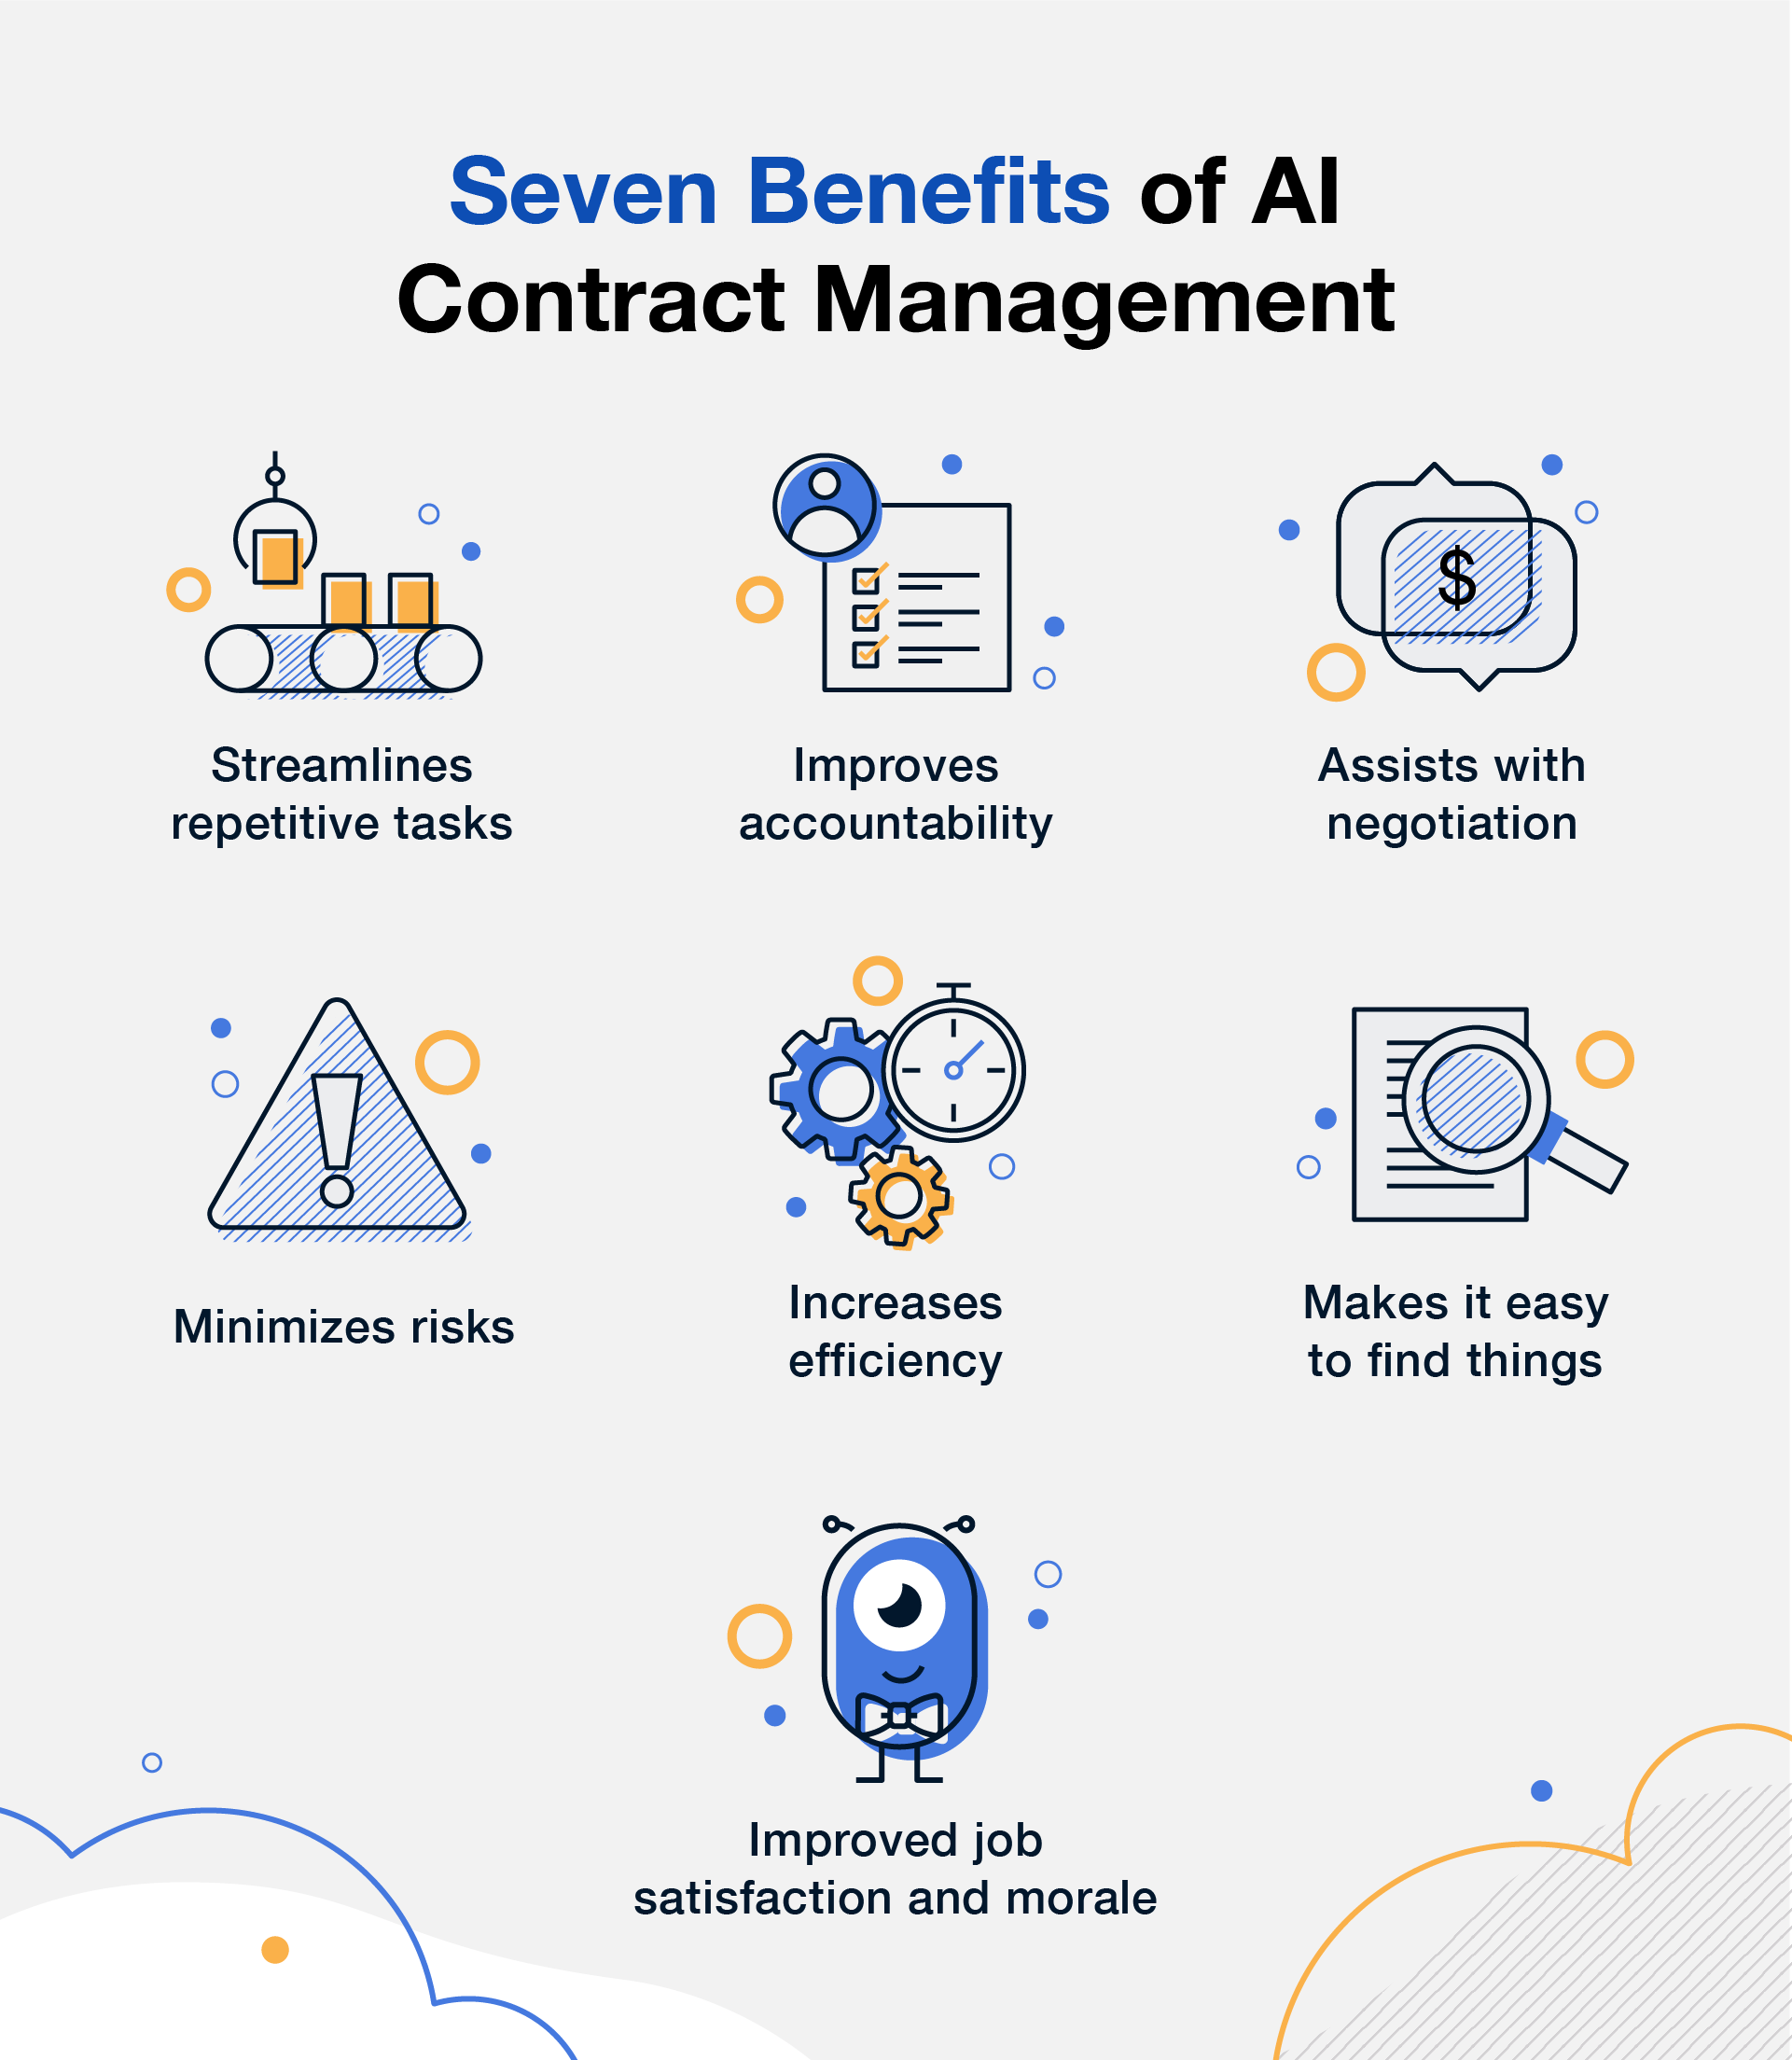 image listing the benefits of AI contract management